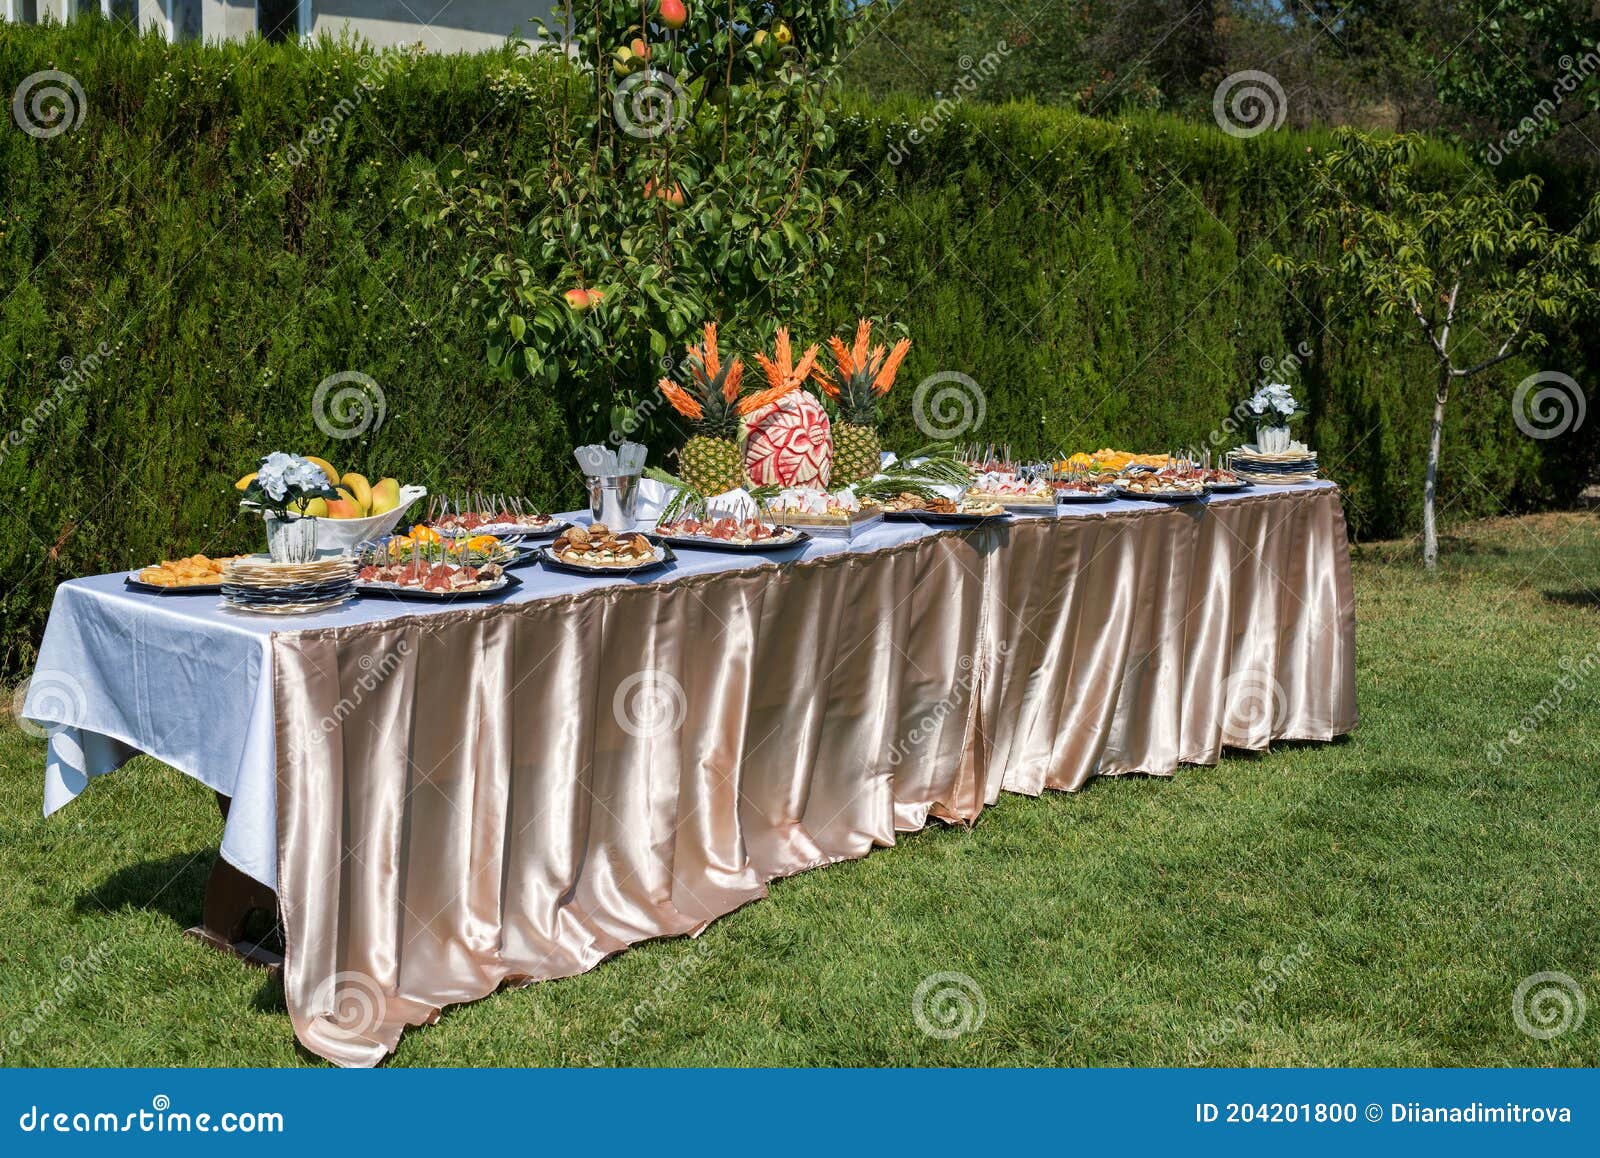 Outdoor Catering Food at the Wedding. Fine Banquet Table in the Back Yard  Stock Photo - Image of elegance, outdoor: 204201800